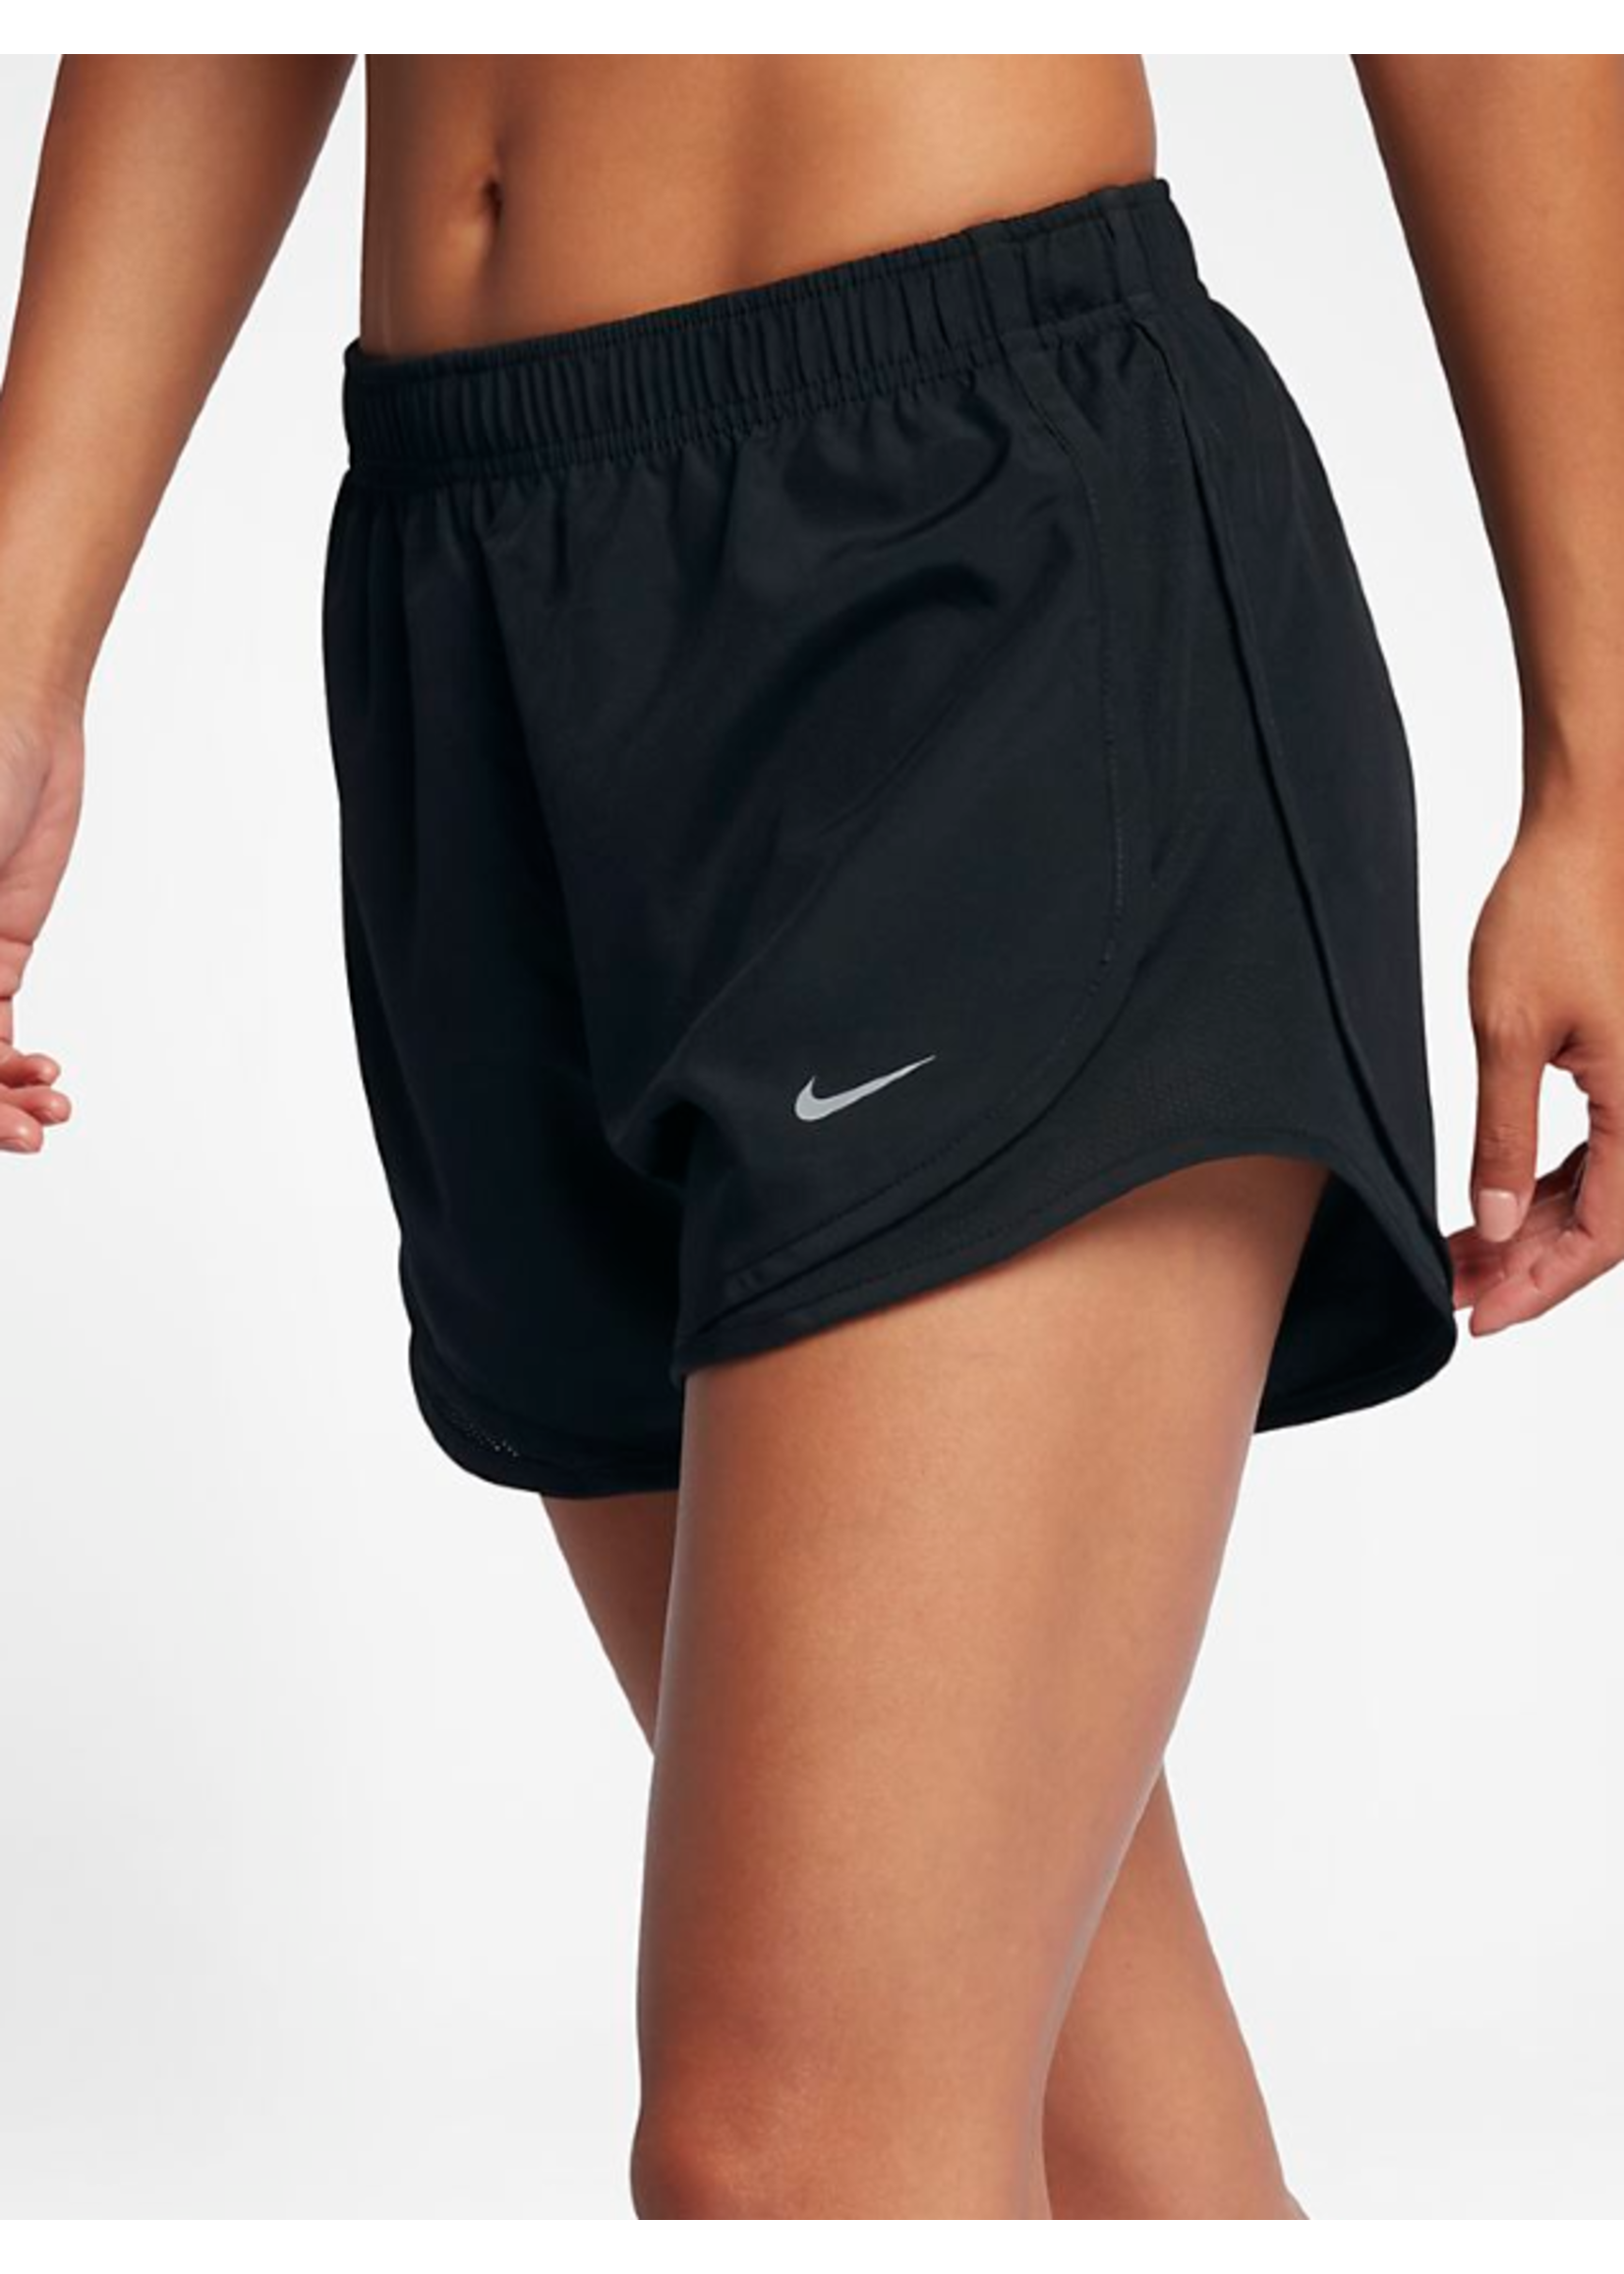 Nike North Central College Women's Tempo Nike Shorts